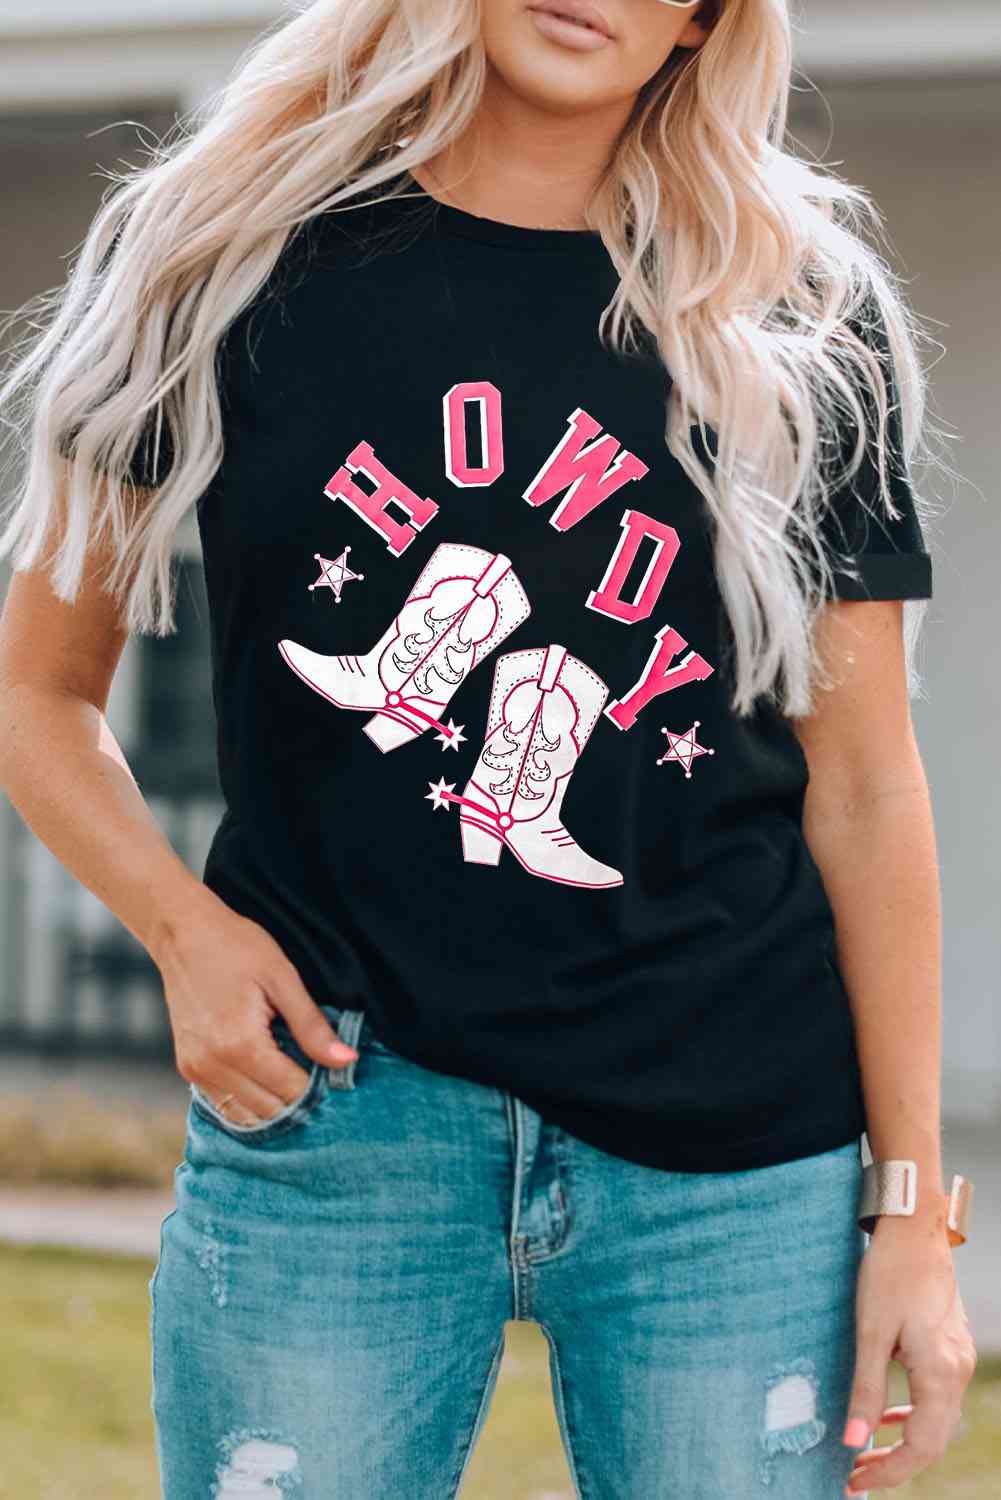 HOWDY Cowboy Boots Graphic Tee Shirts & Tops Krazy Heart Designs Boutique Black S 